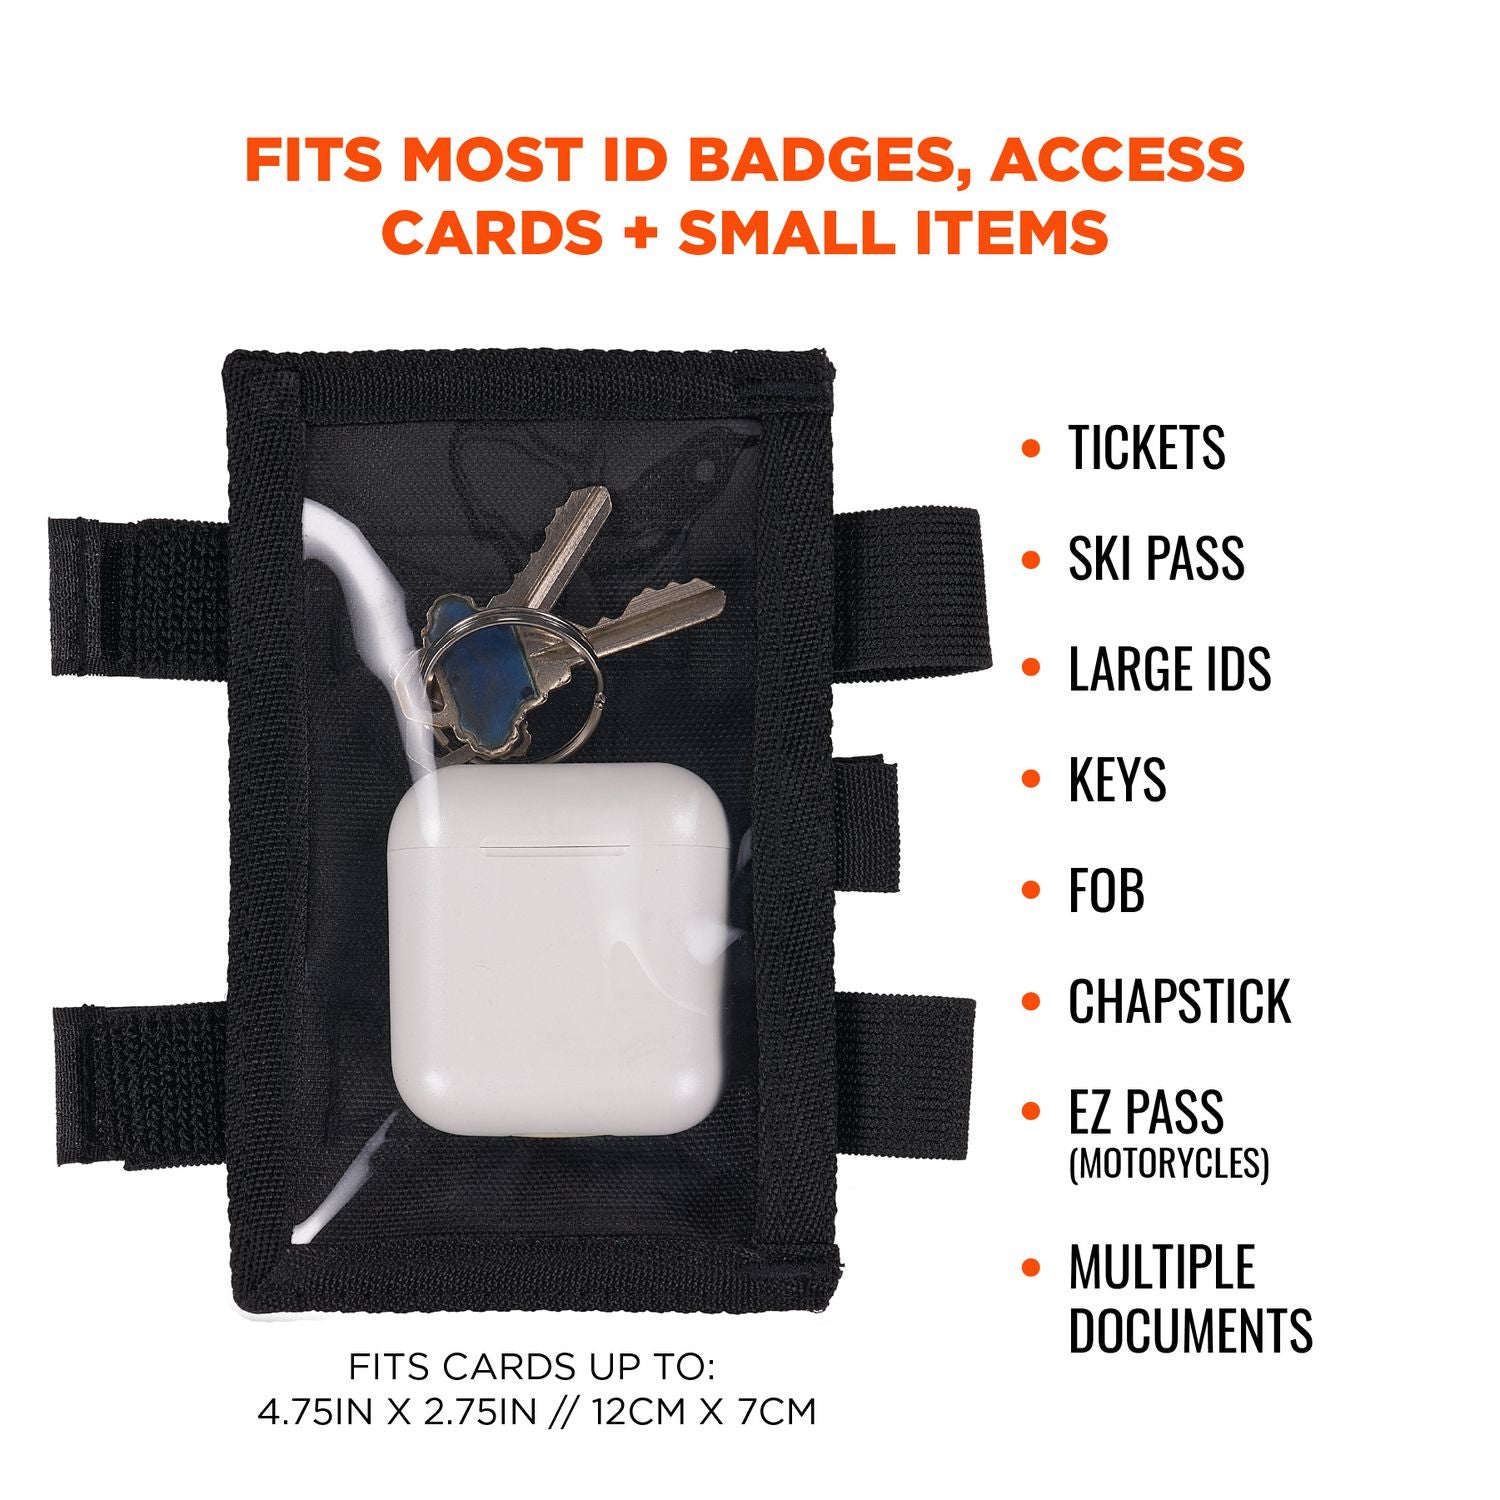 squids-3390-dual-band-arm-id-badge-holder-w-hook-loop-vertical-black-375-x-575-275-x-475-insert-ships-in-1-3-bus-days_ego19966 - 4